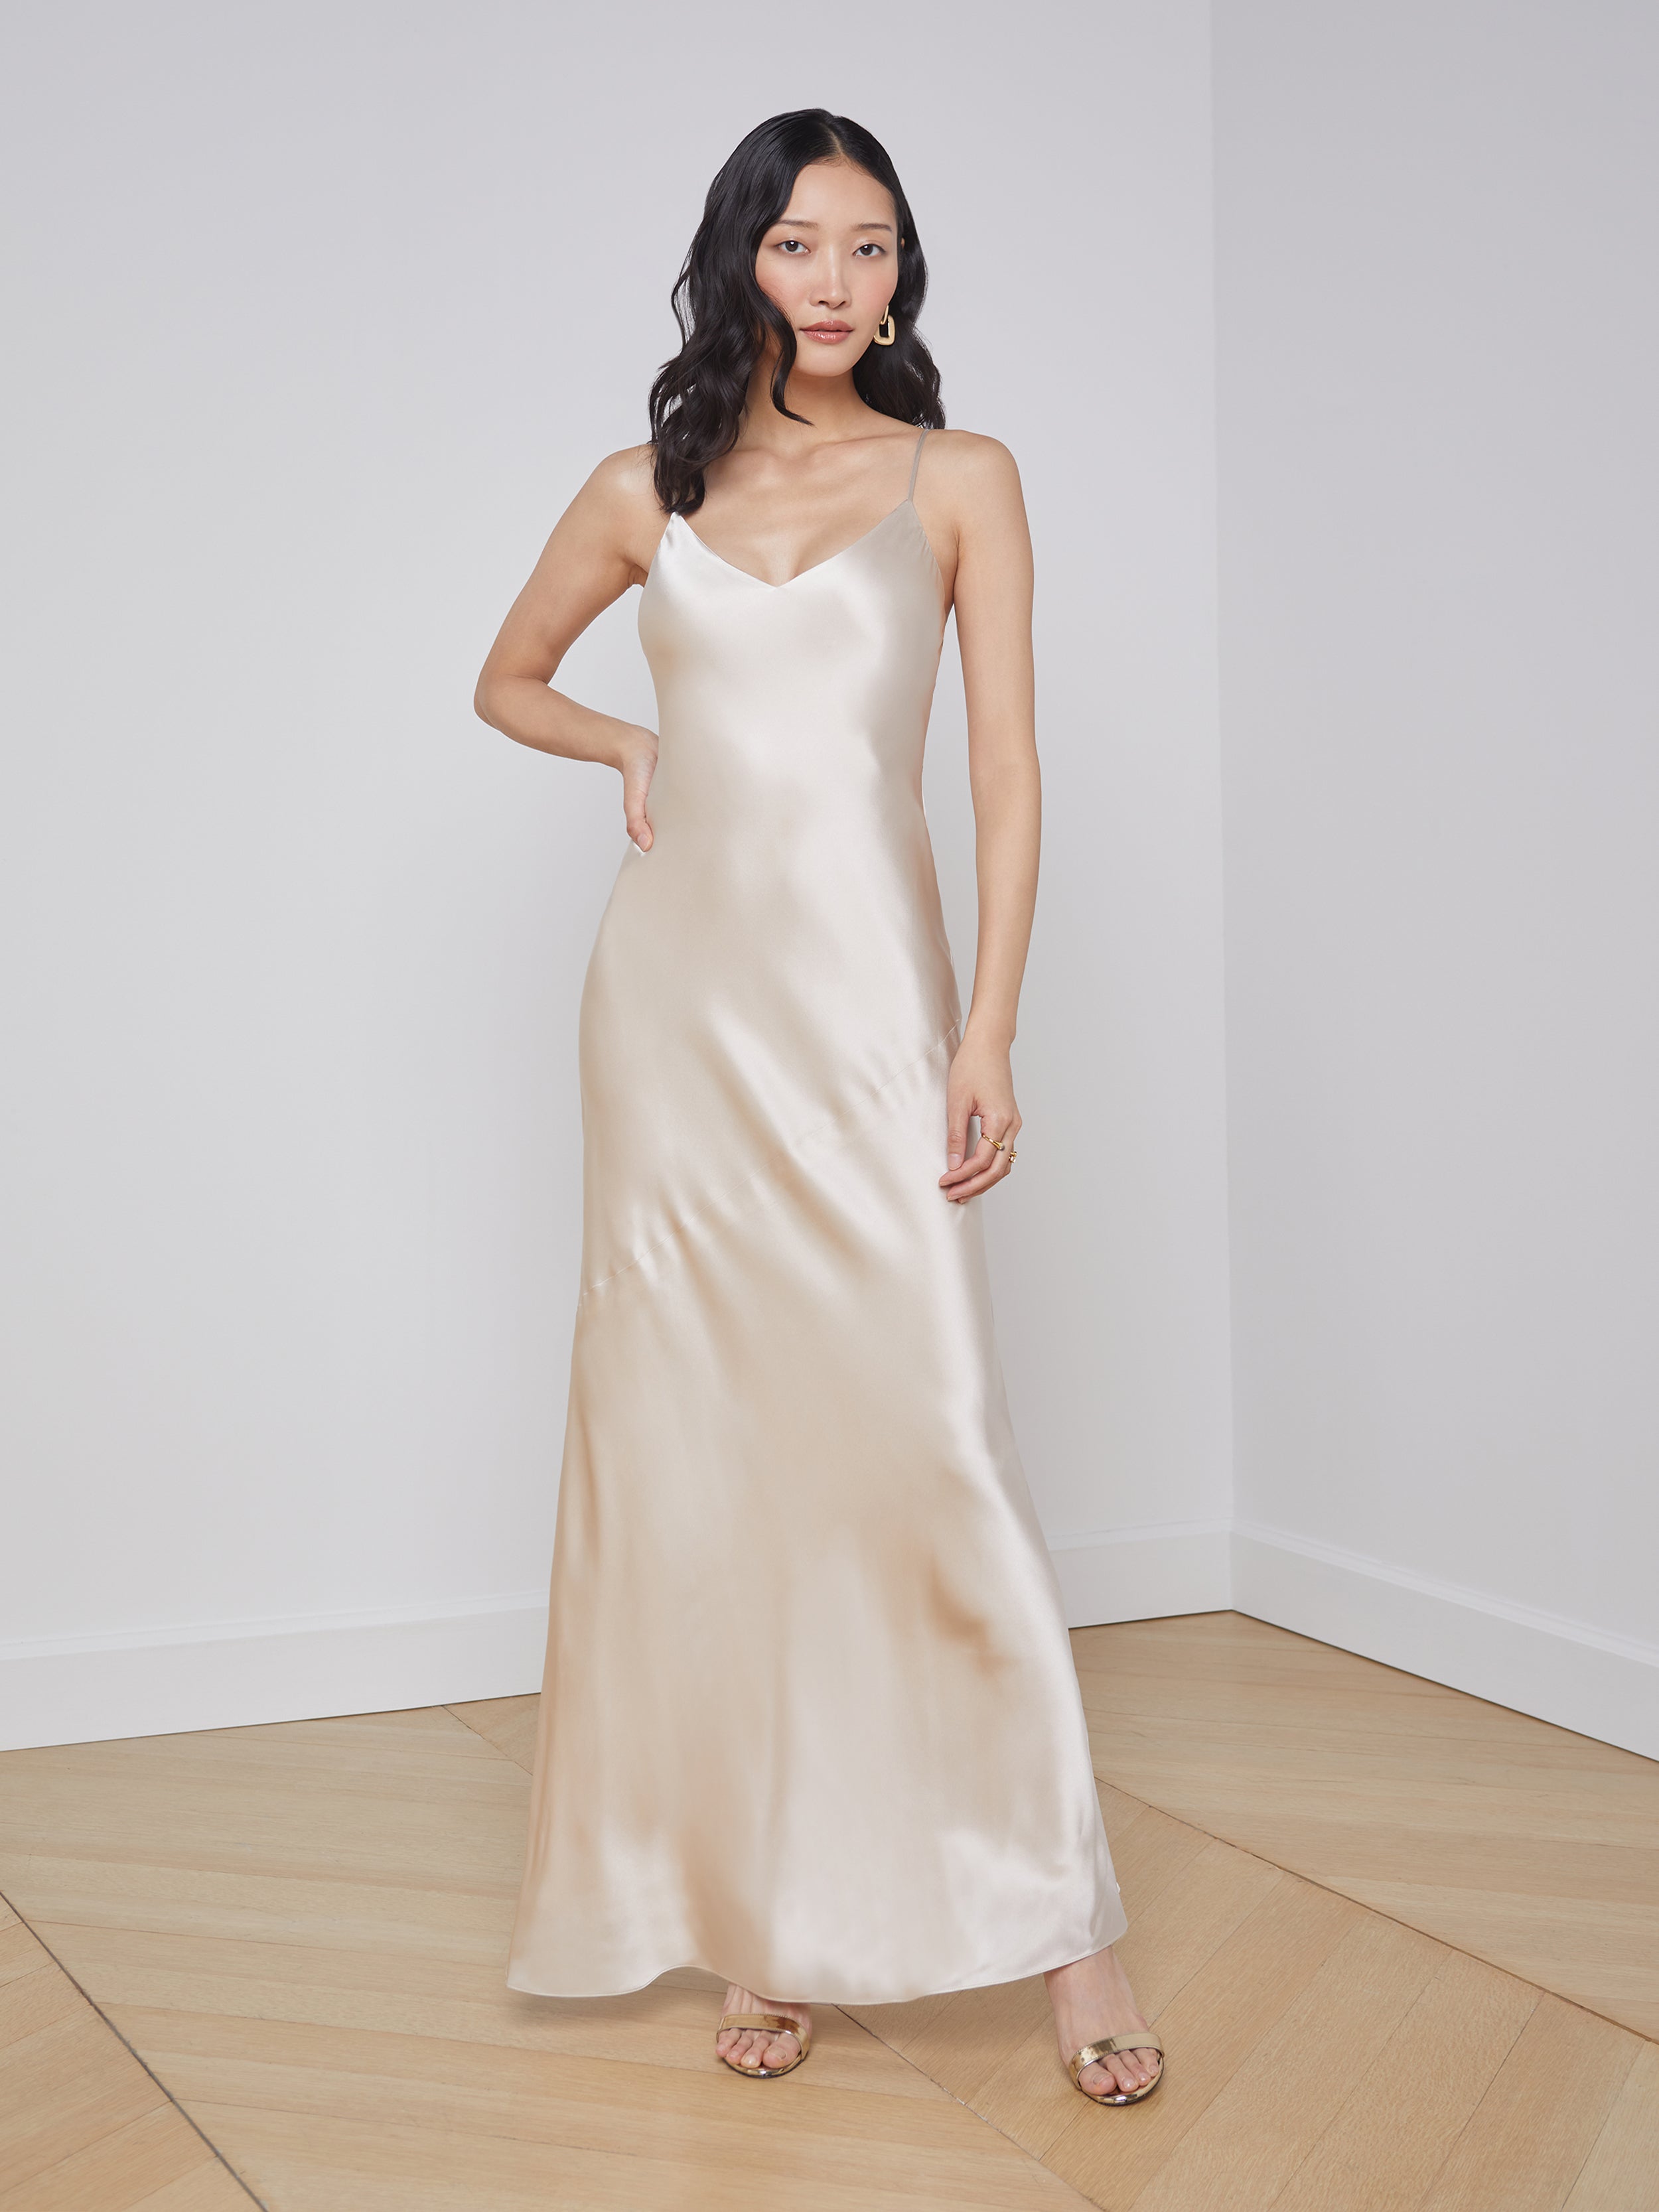 SATIN SILK CHAMPAGNE BACKLESS SLIP GOWN  Fashion, Nice dresses, Featuring  dress